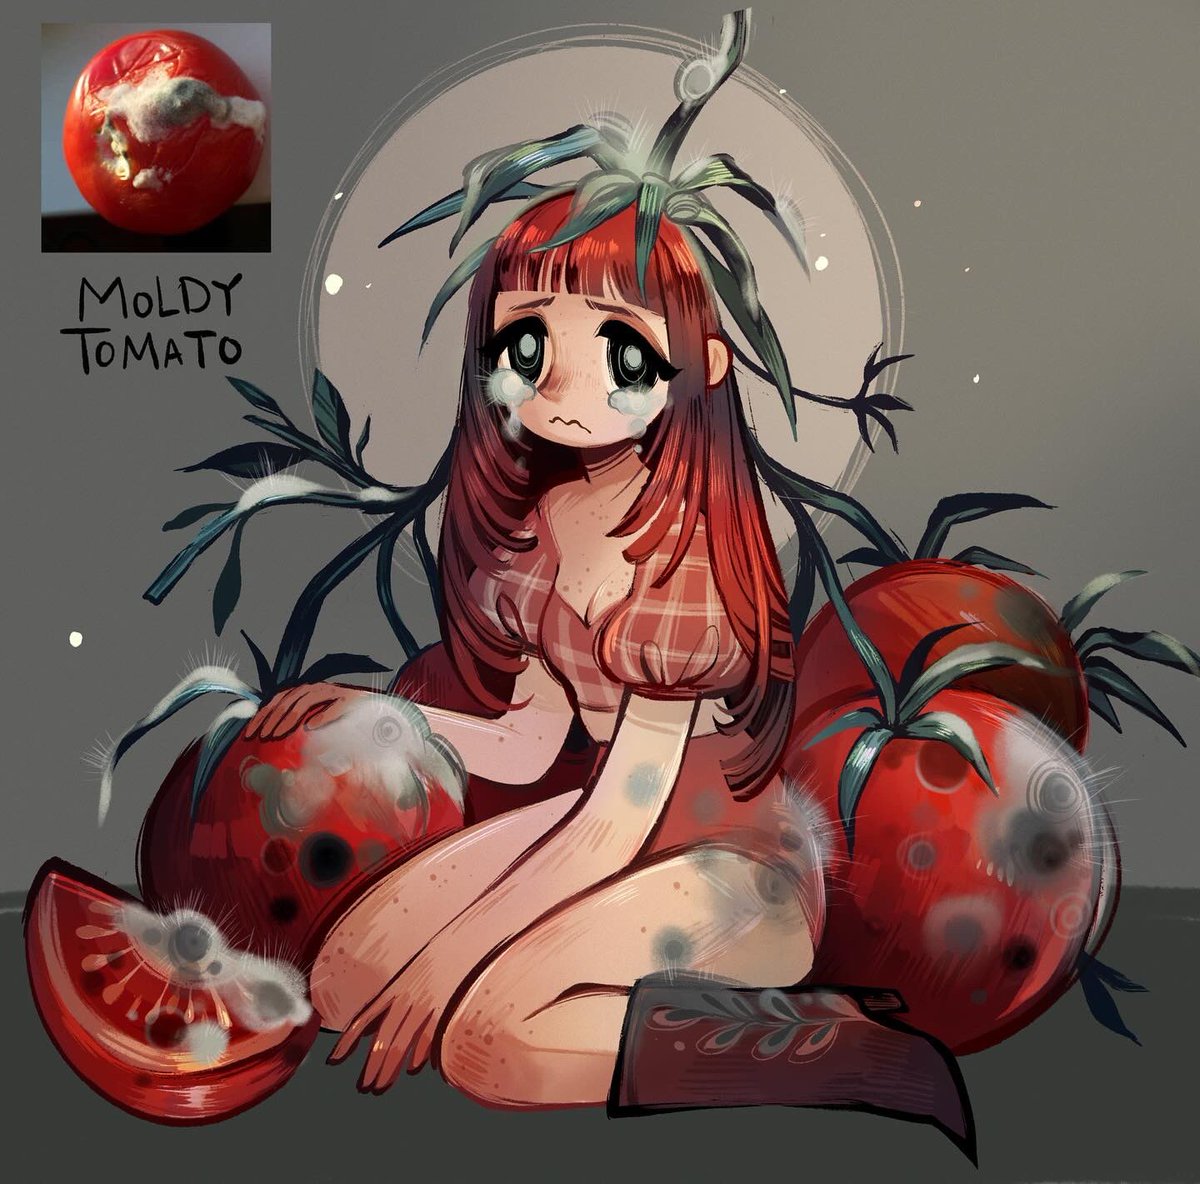 Moldy tomato :( why’d you leave her on the counter for so long?